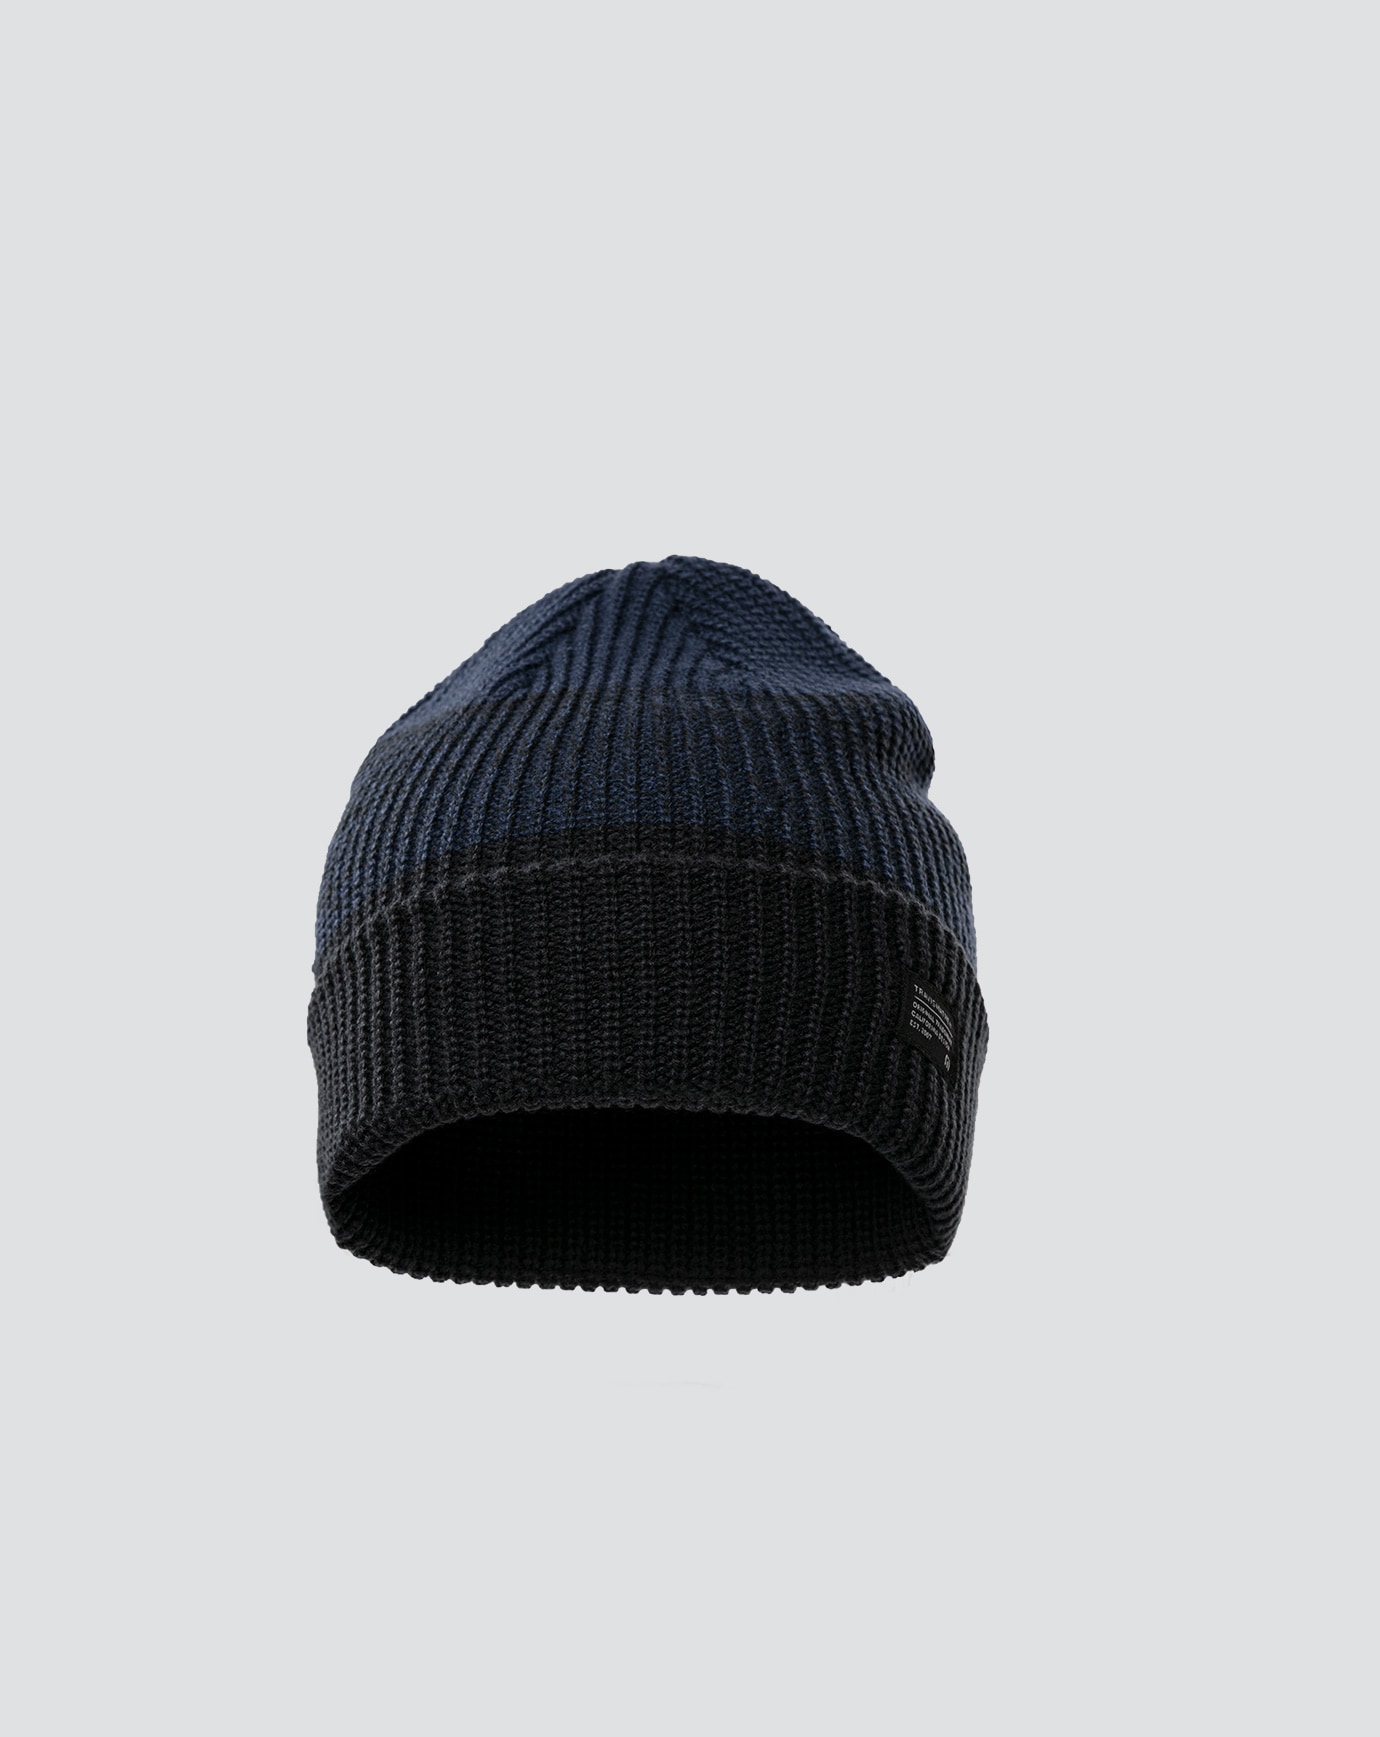 Related Product - PREVAILING WINDS BEANIE